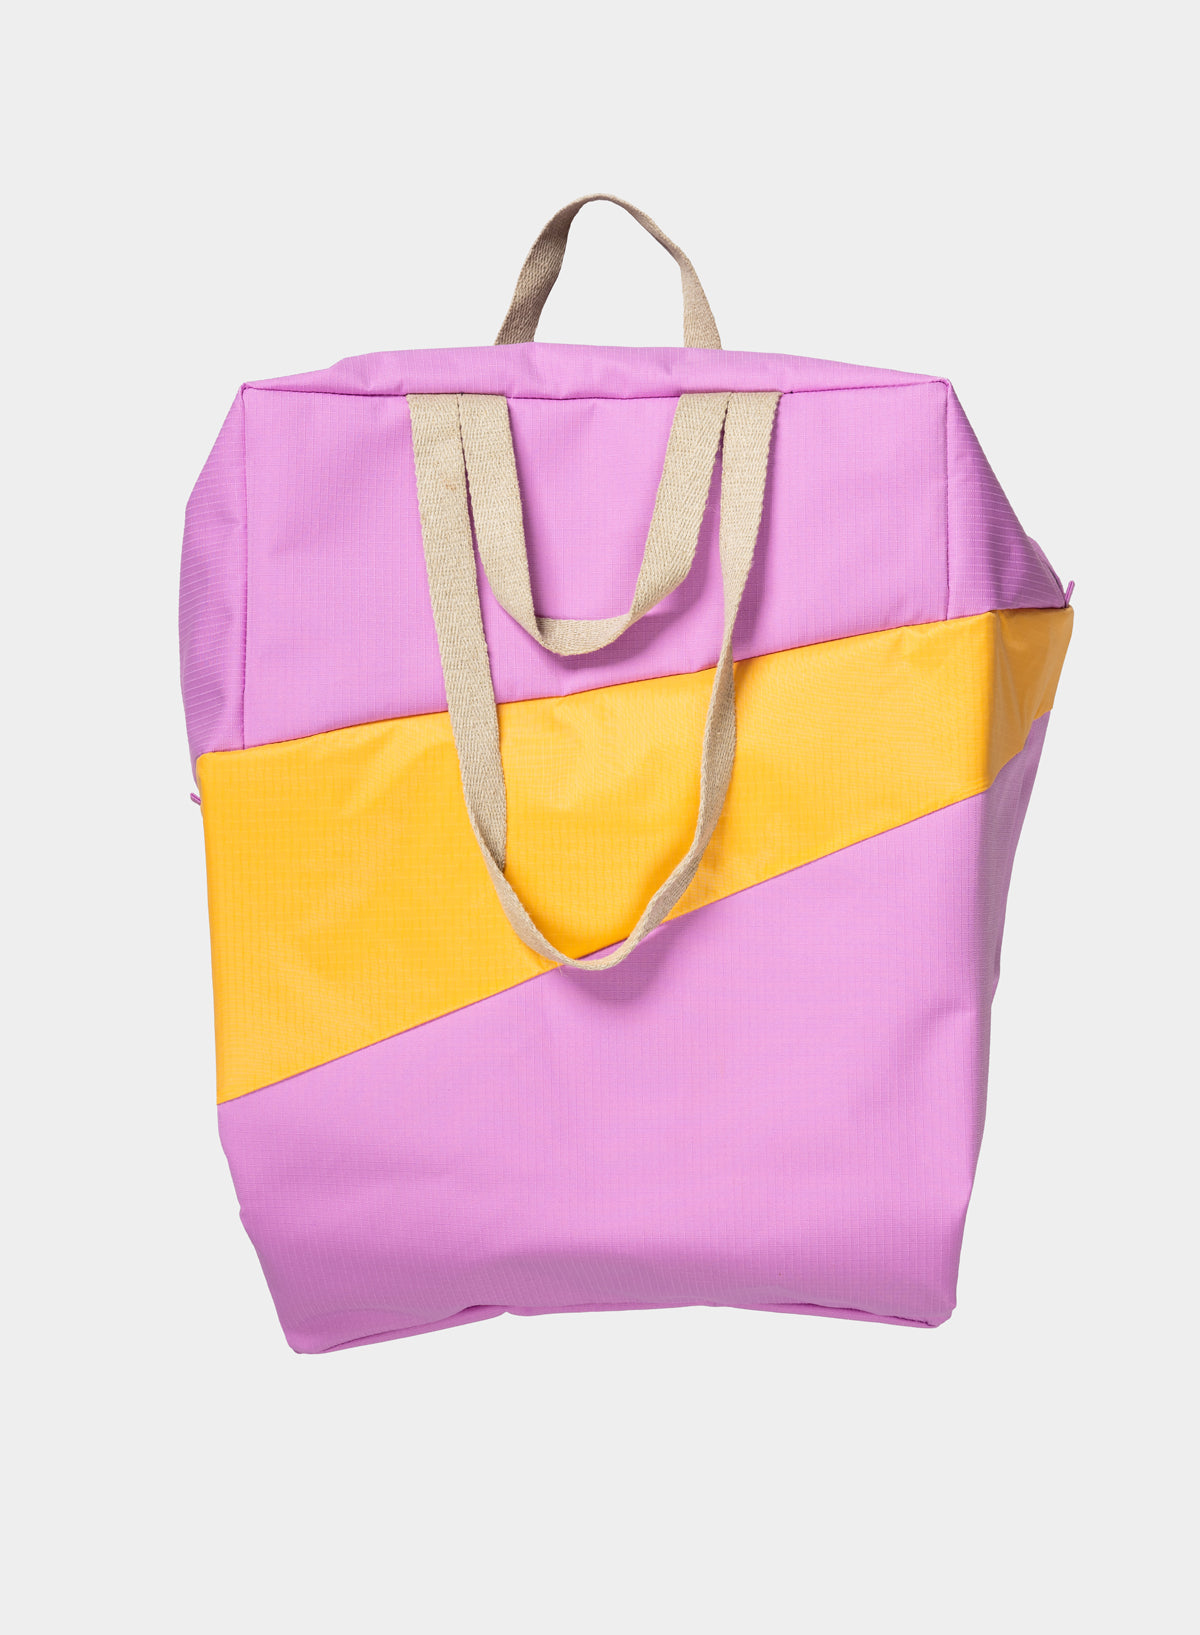 The New Tote Bag Large